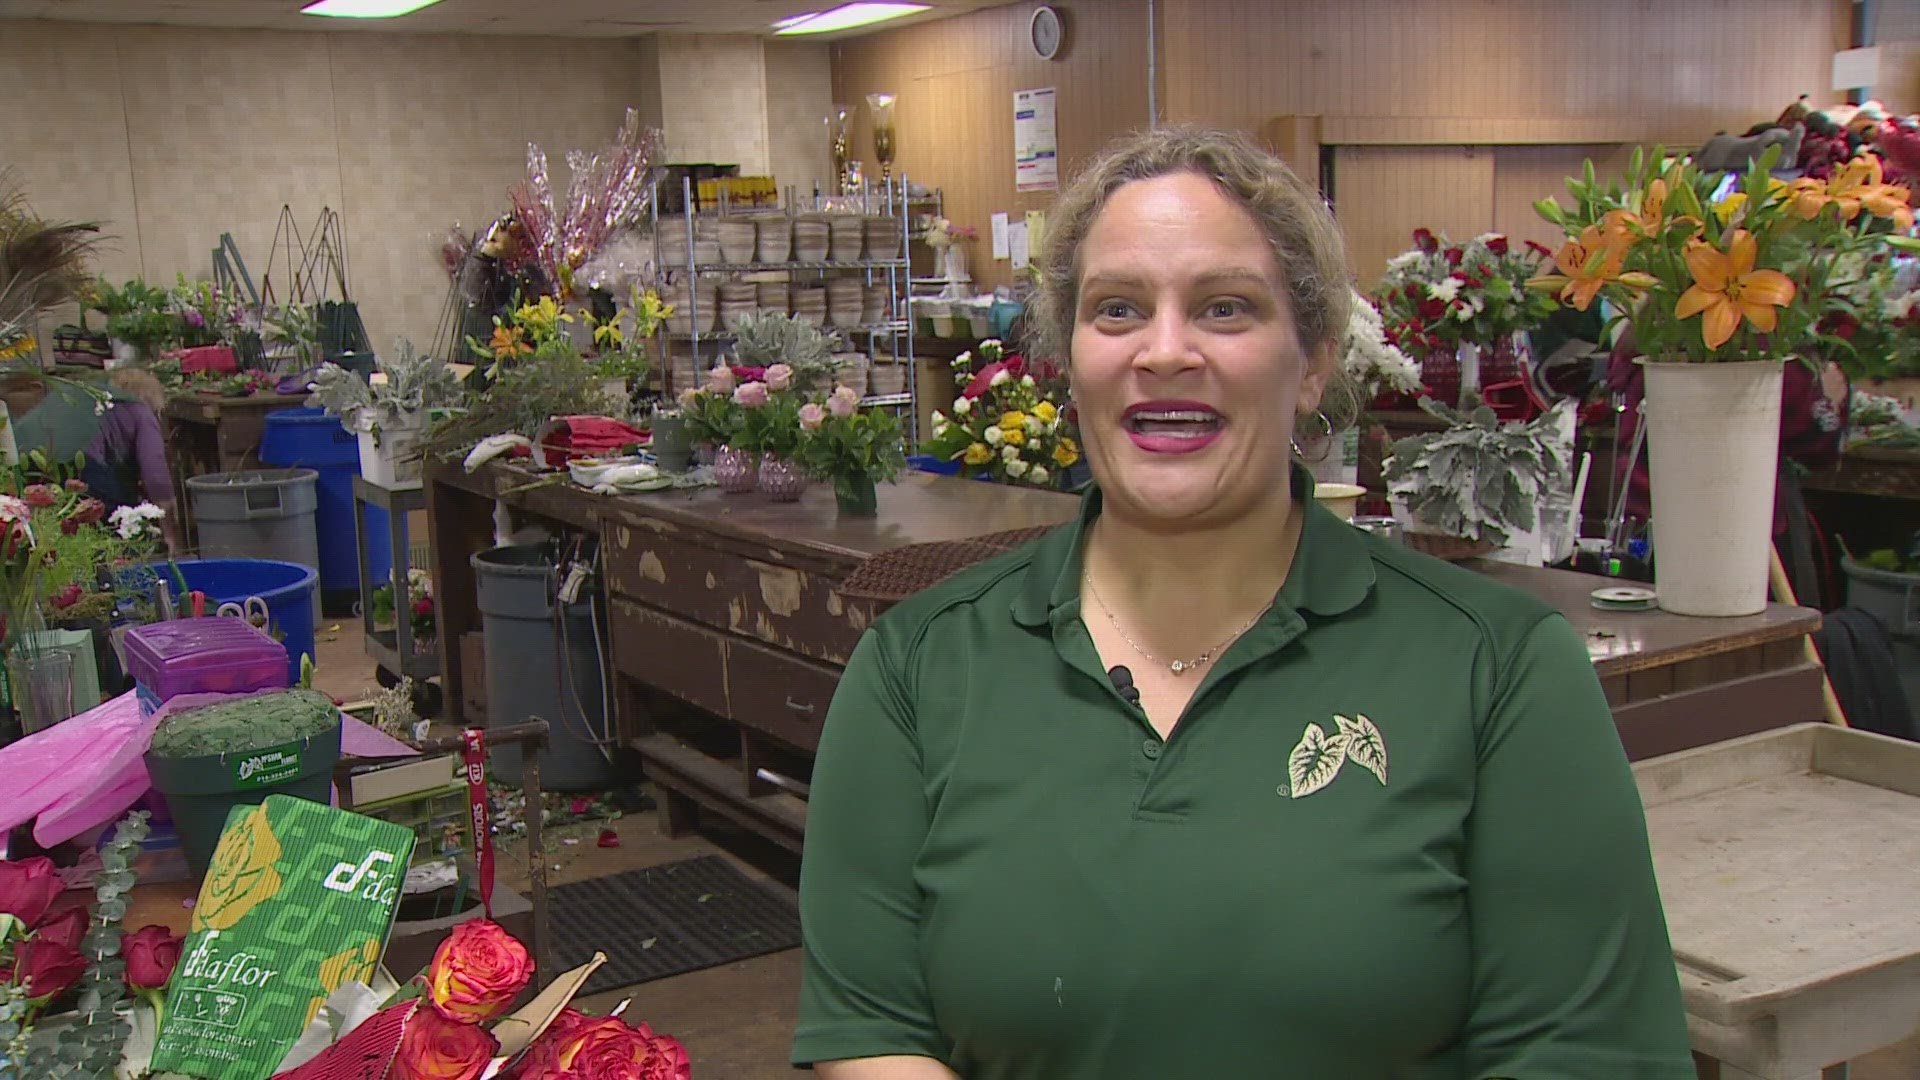 The Mcshan florist shop in Fort Worth says they ordered flowers for today back in October and November